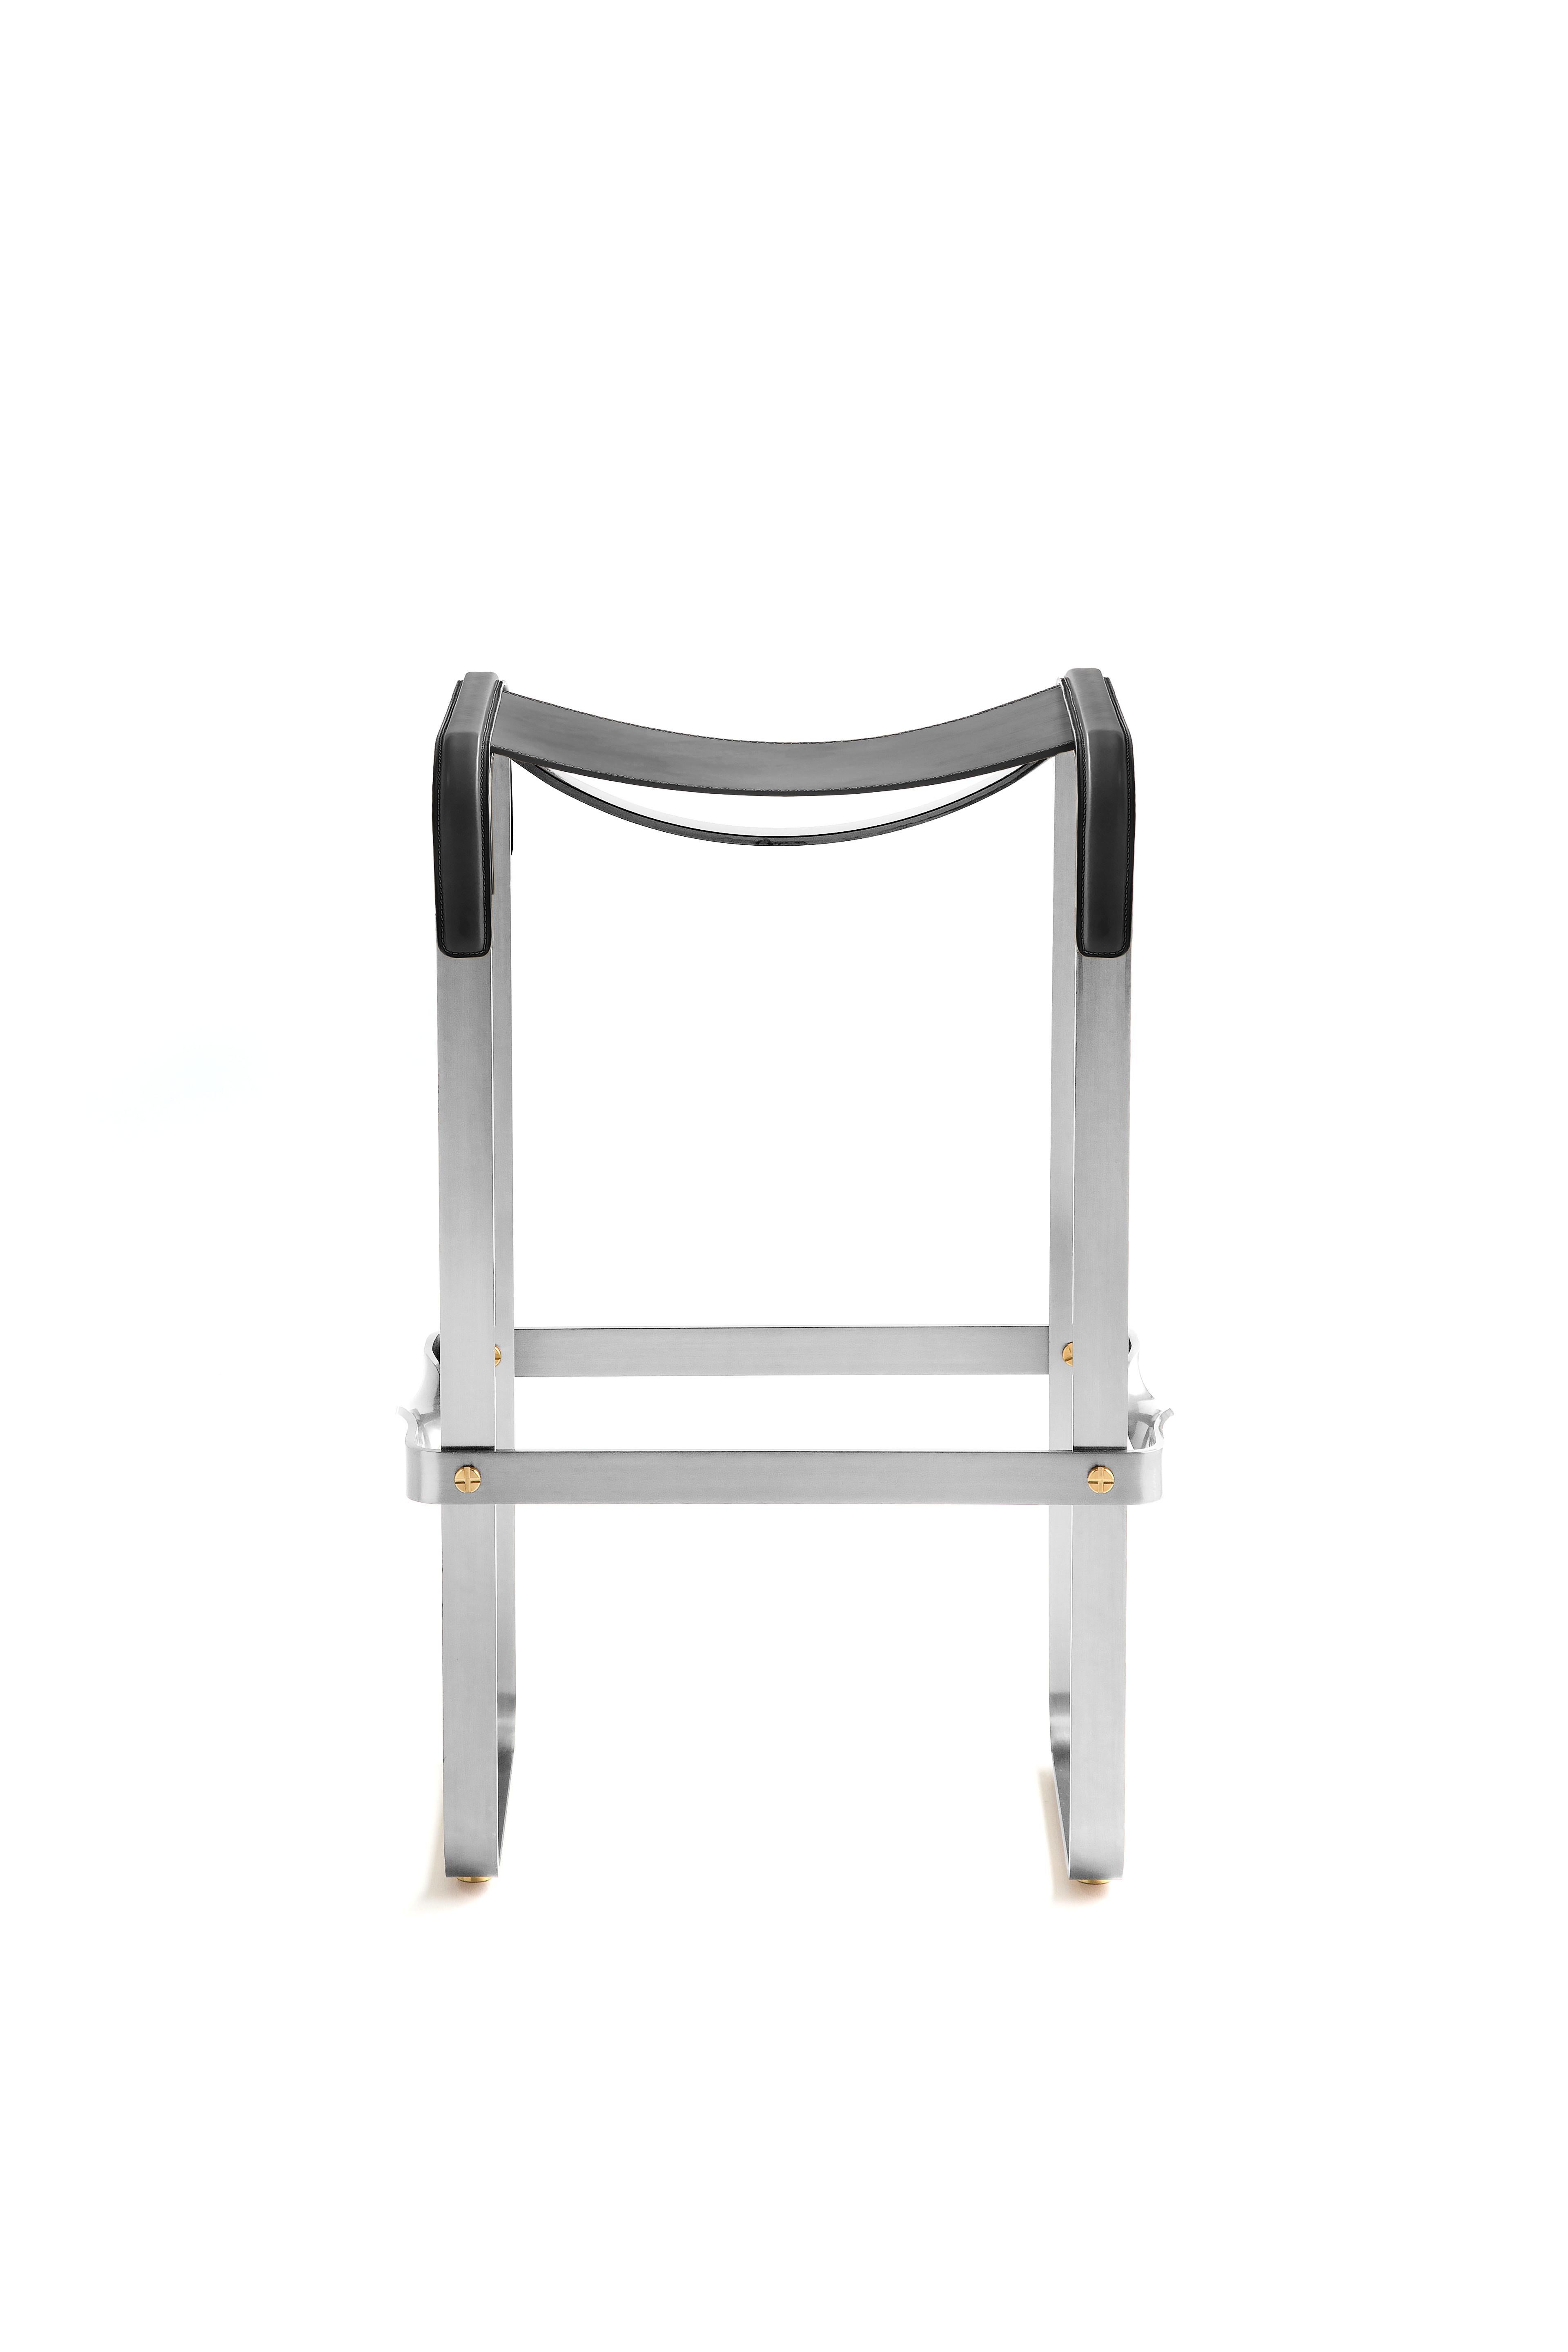 The Wanderlust contemporary barstool belongs to a collection of minimalist and serene pieces where exclusivity and precision are shown in small details such as the hand-turned metal nuts and bolts that fix the leather surfaces, that go unnoticed at